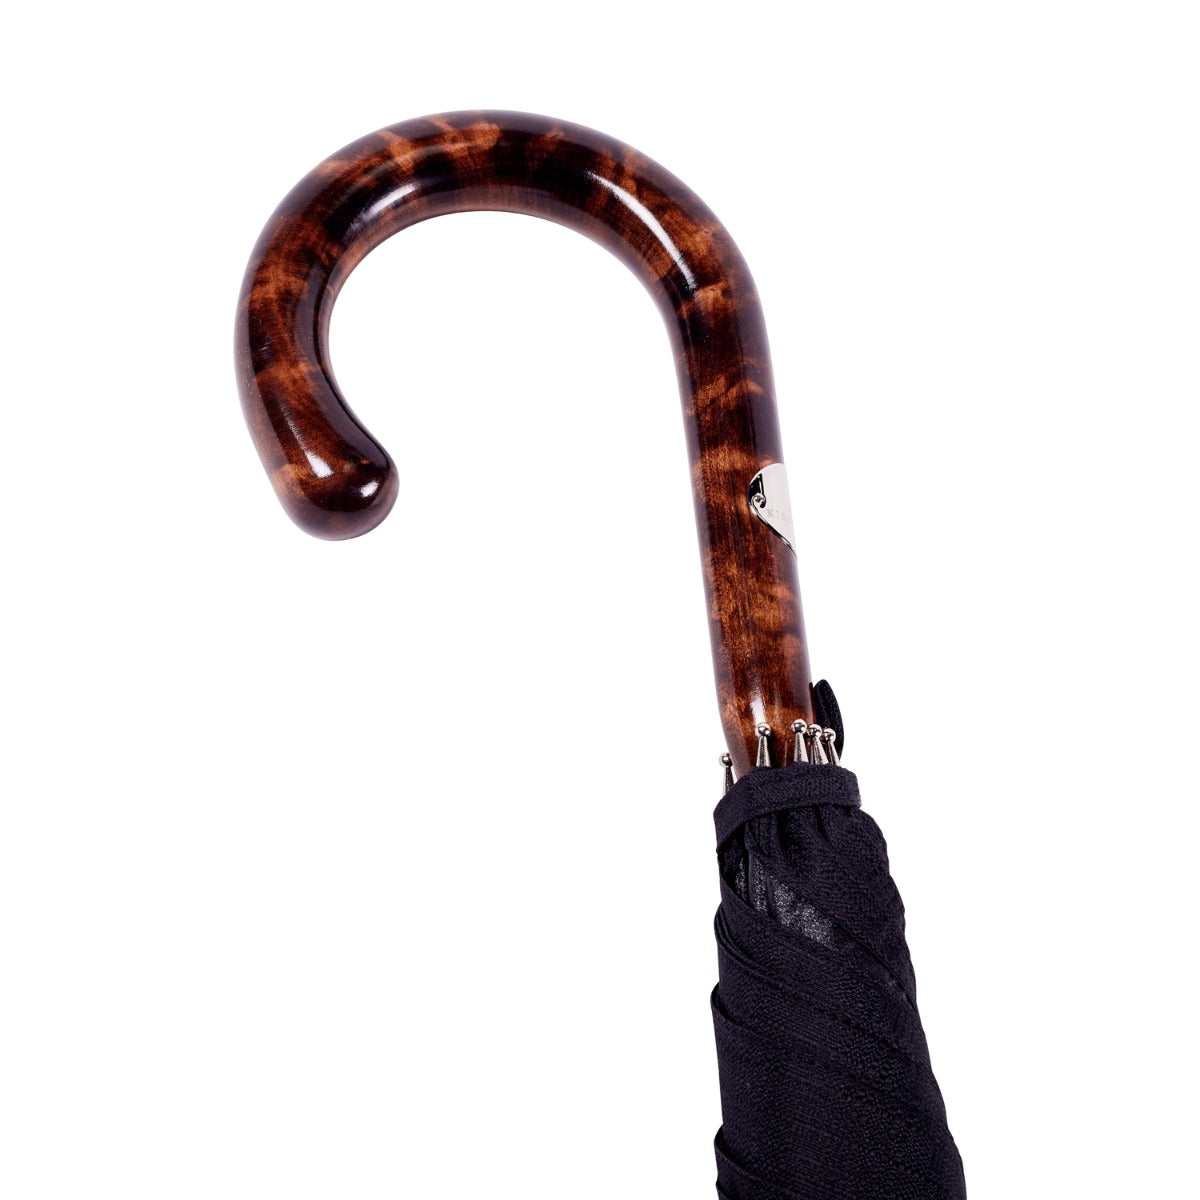 A KirbyAllison.com solid-stick umbrella with a Shiny Tiger Maple Handle and Imperial Black Canopy.